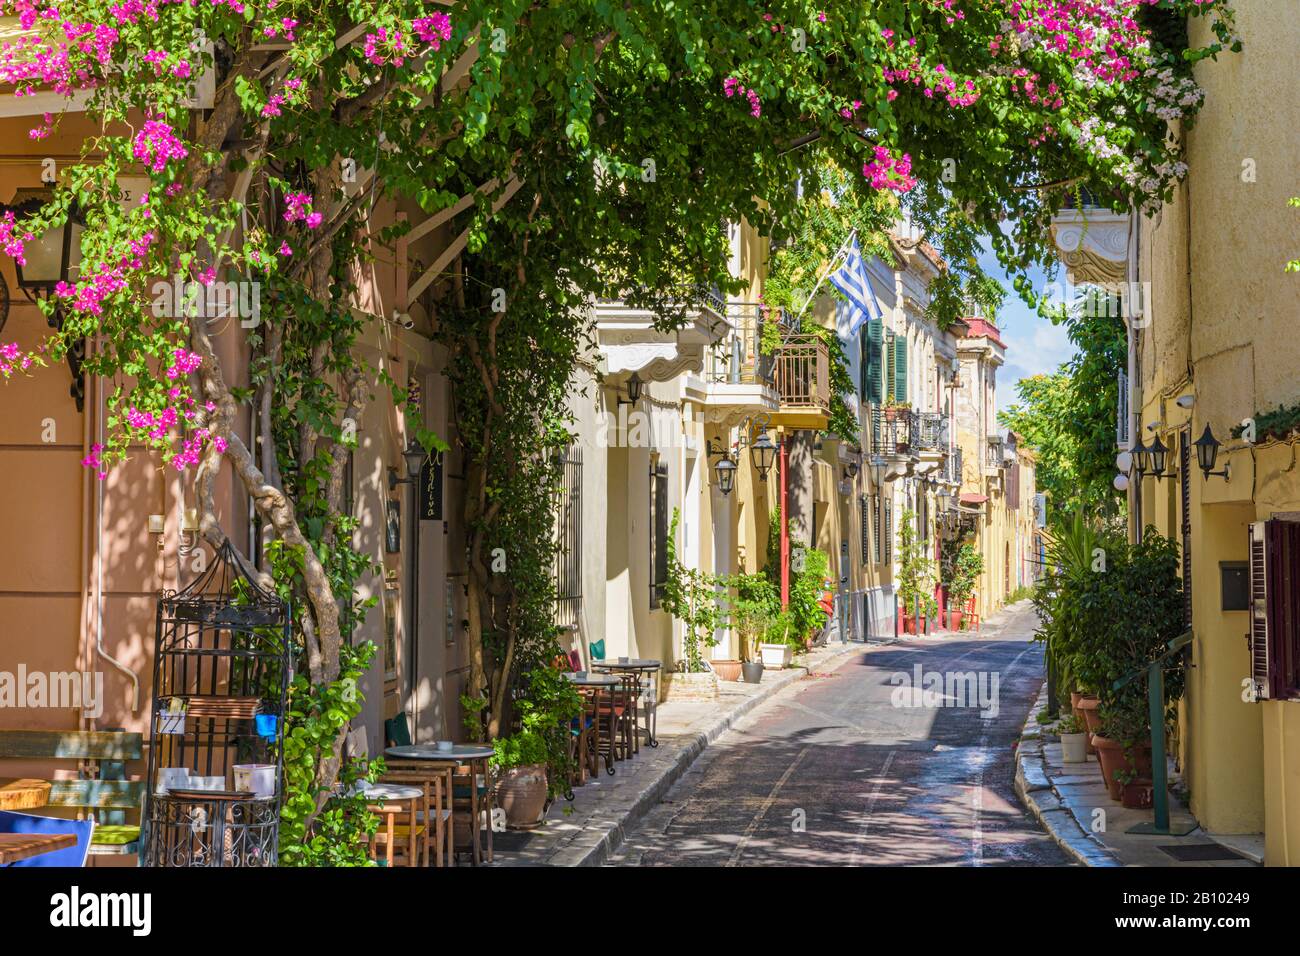 Bougainvillea covered streets of the Plaka neighbourhood in Athens, Greece Stock Photo